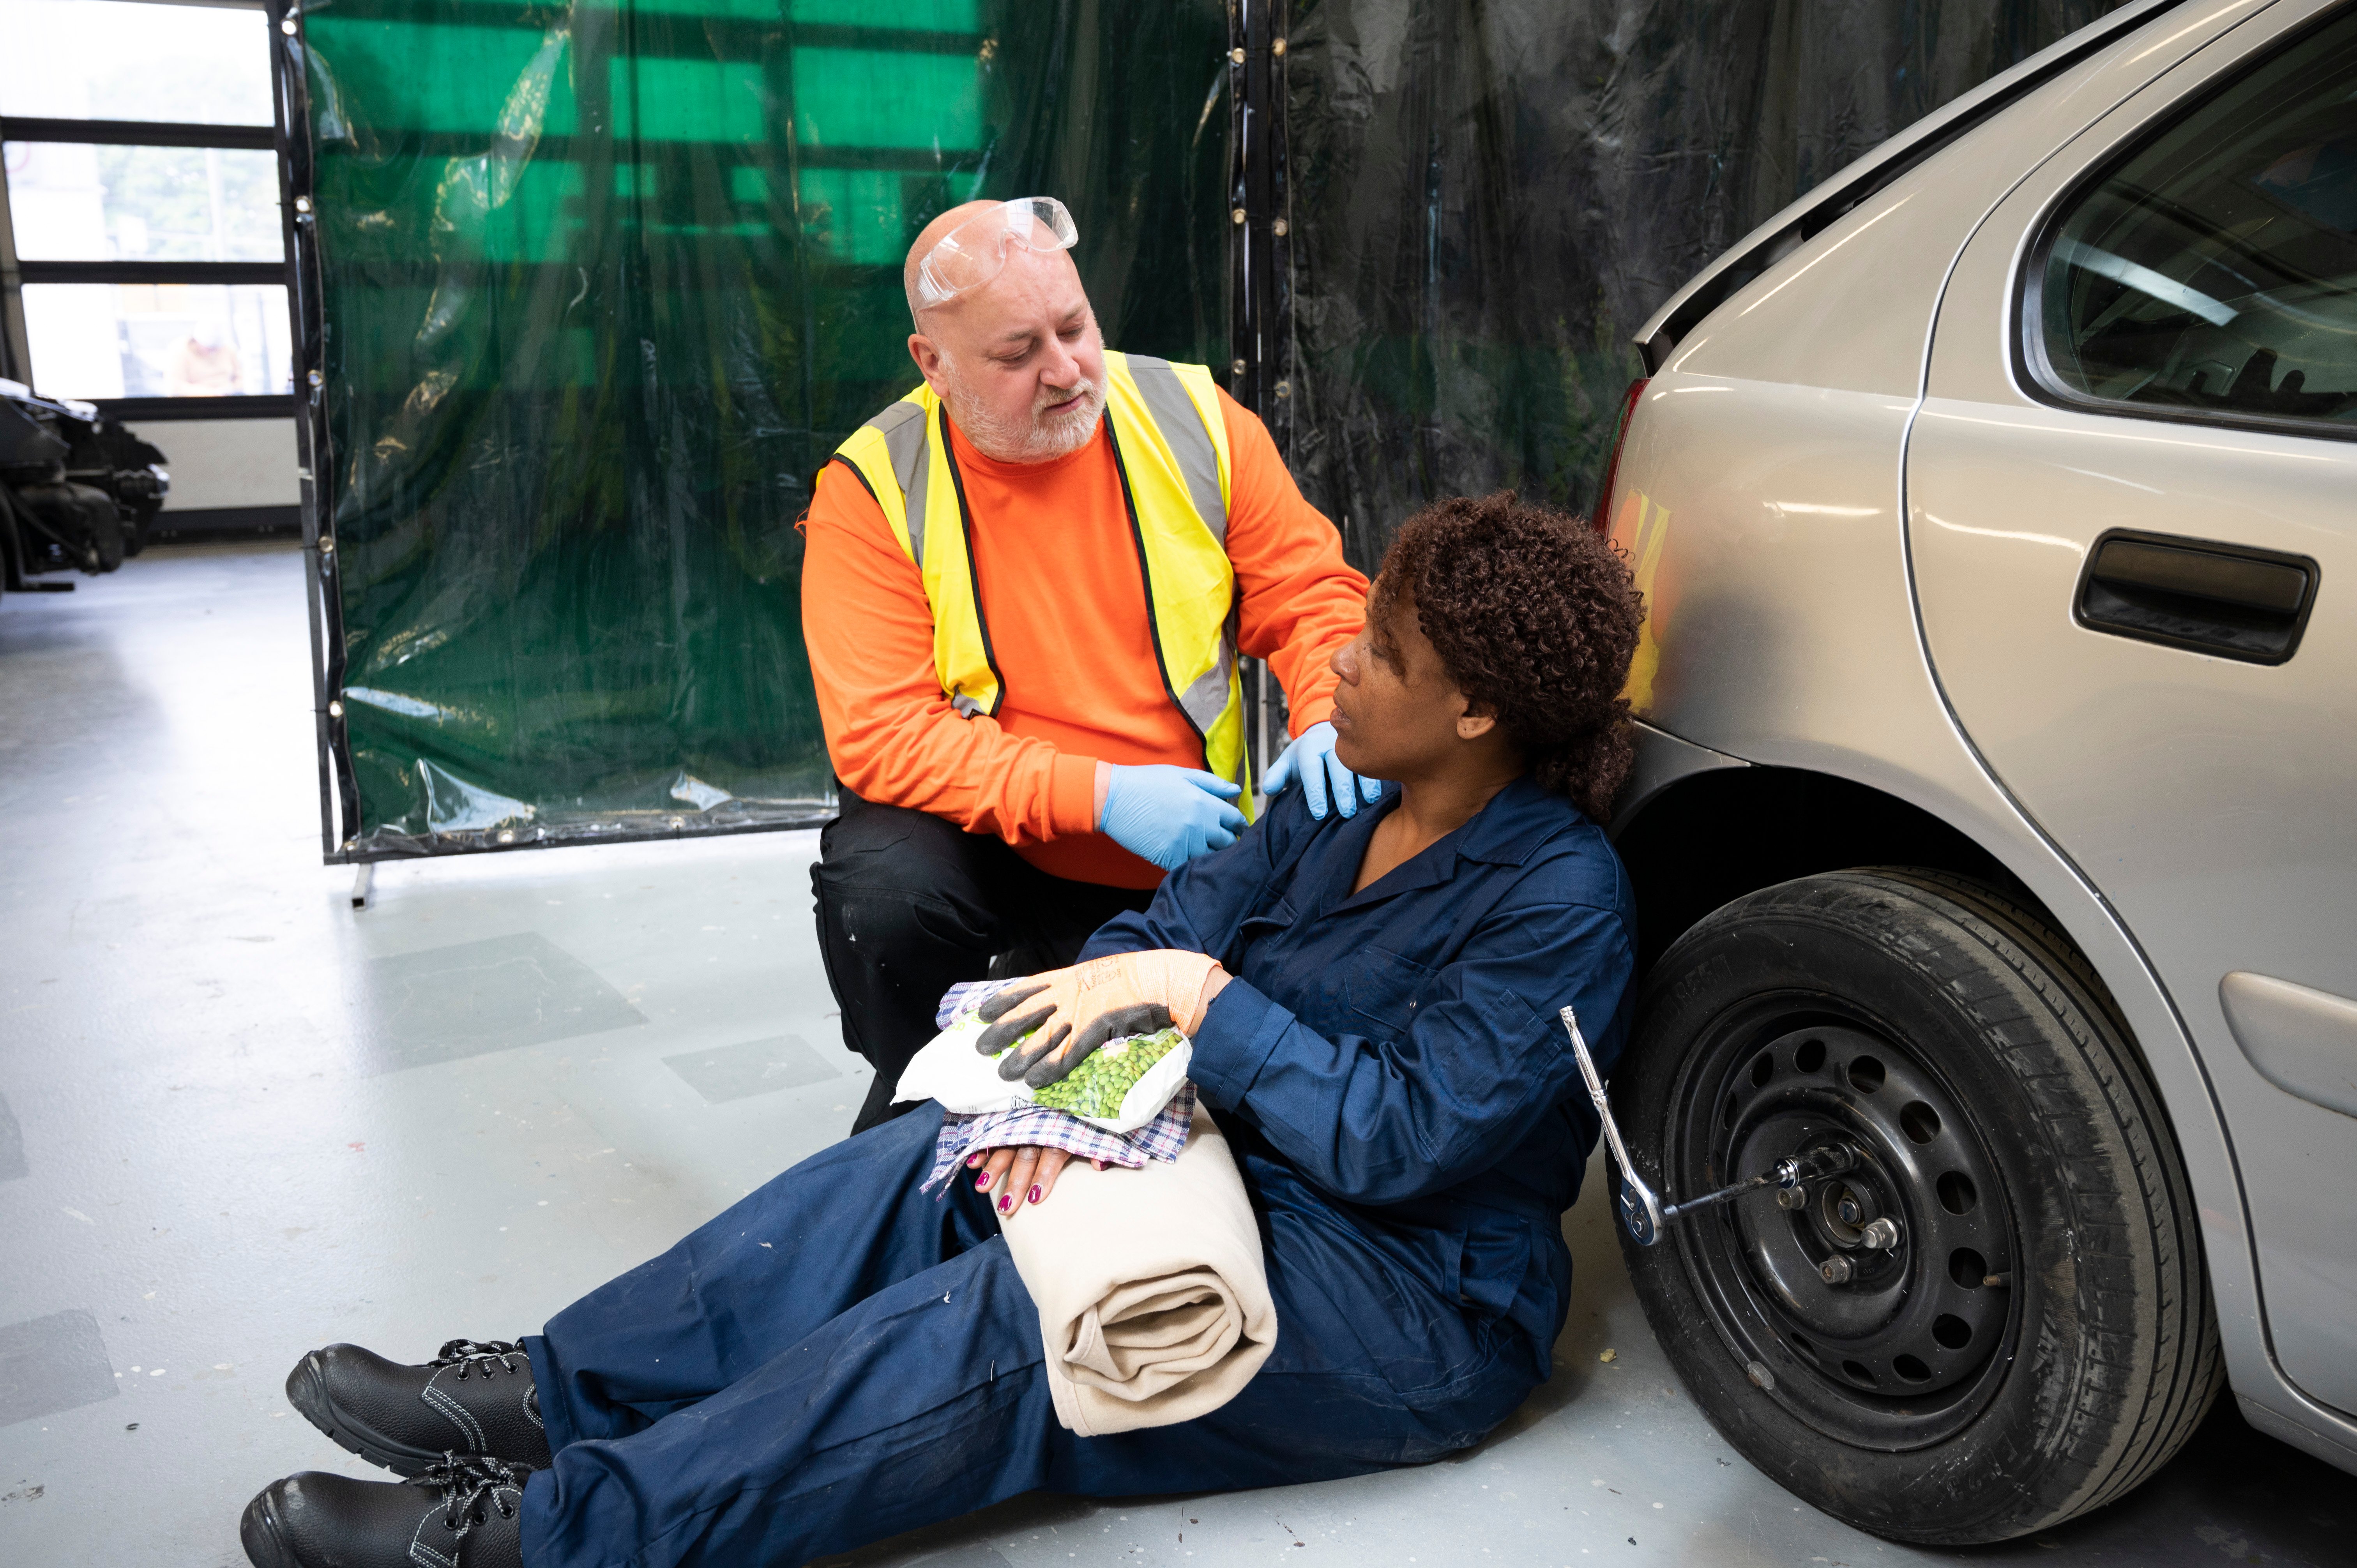 What are the legal responsibilities of a first aider?